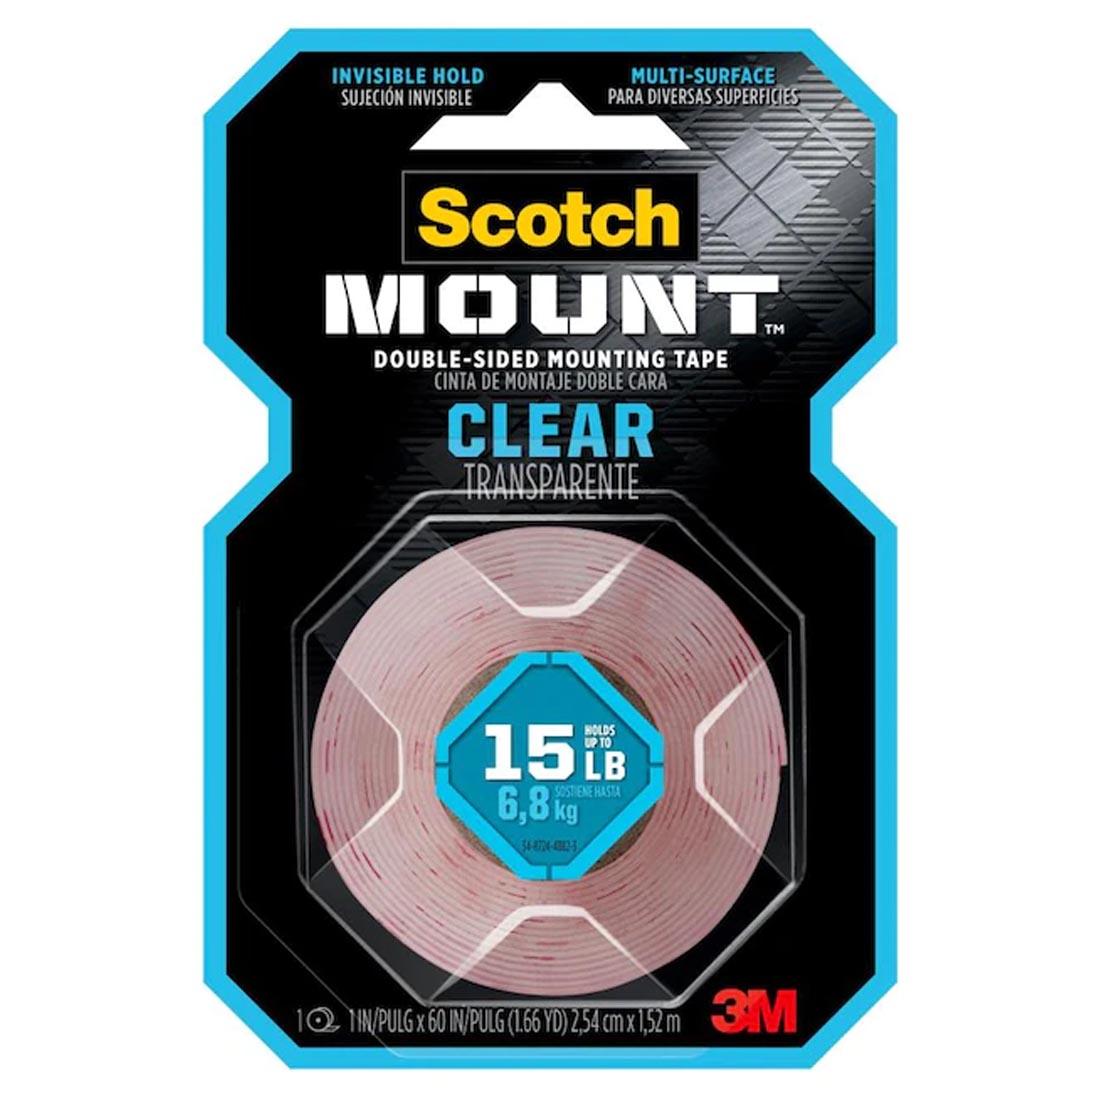 Scotch Permanent Clear Mounting Tape, 1 x 60" roll